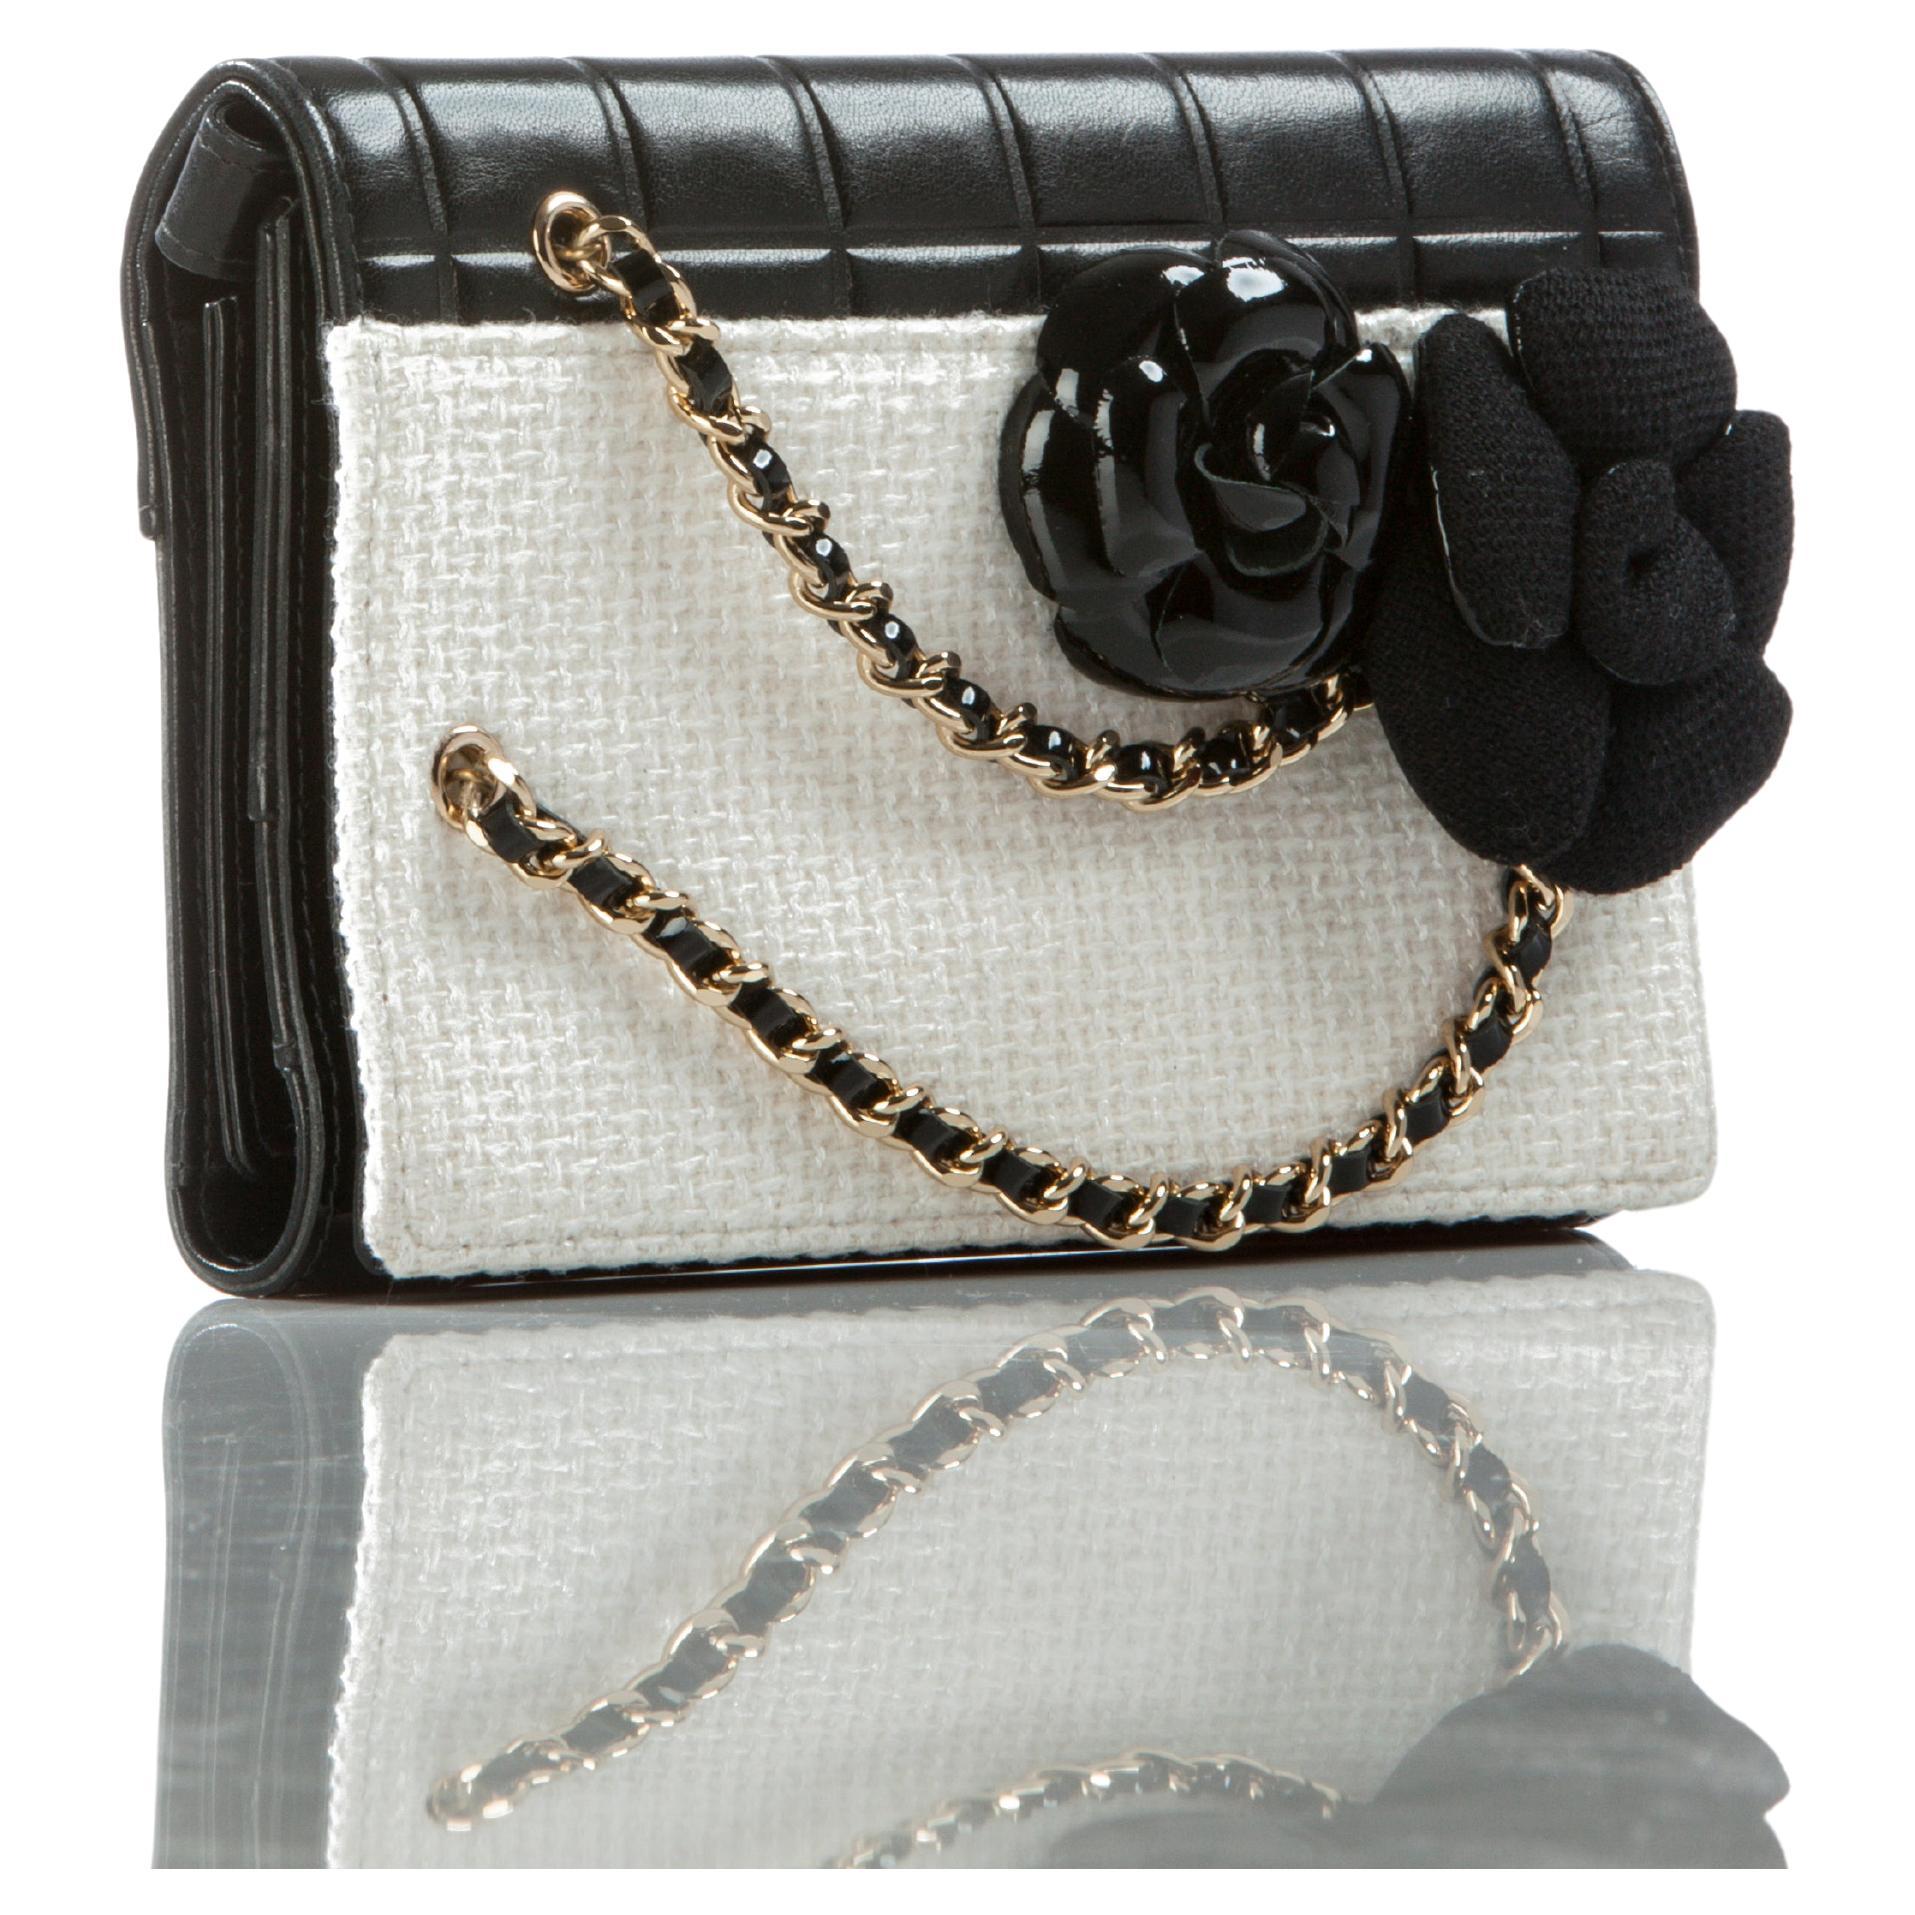 Chanel Timeless Tweed Iconic Camelia Flower Bicolor Black & White Leather Clutch For Sale